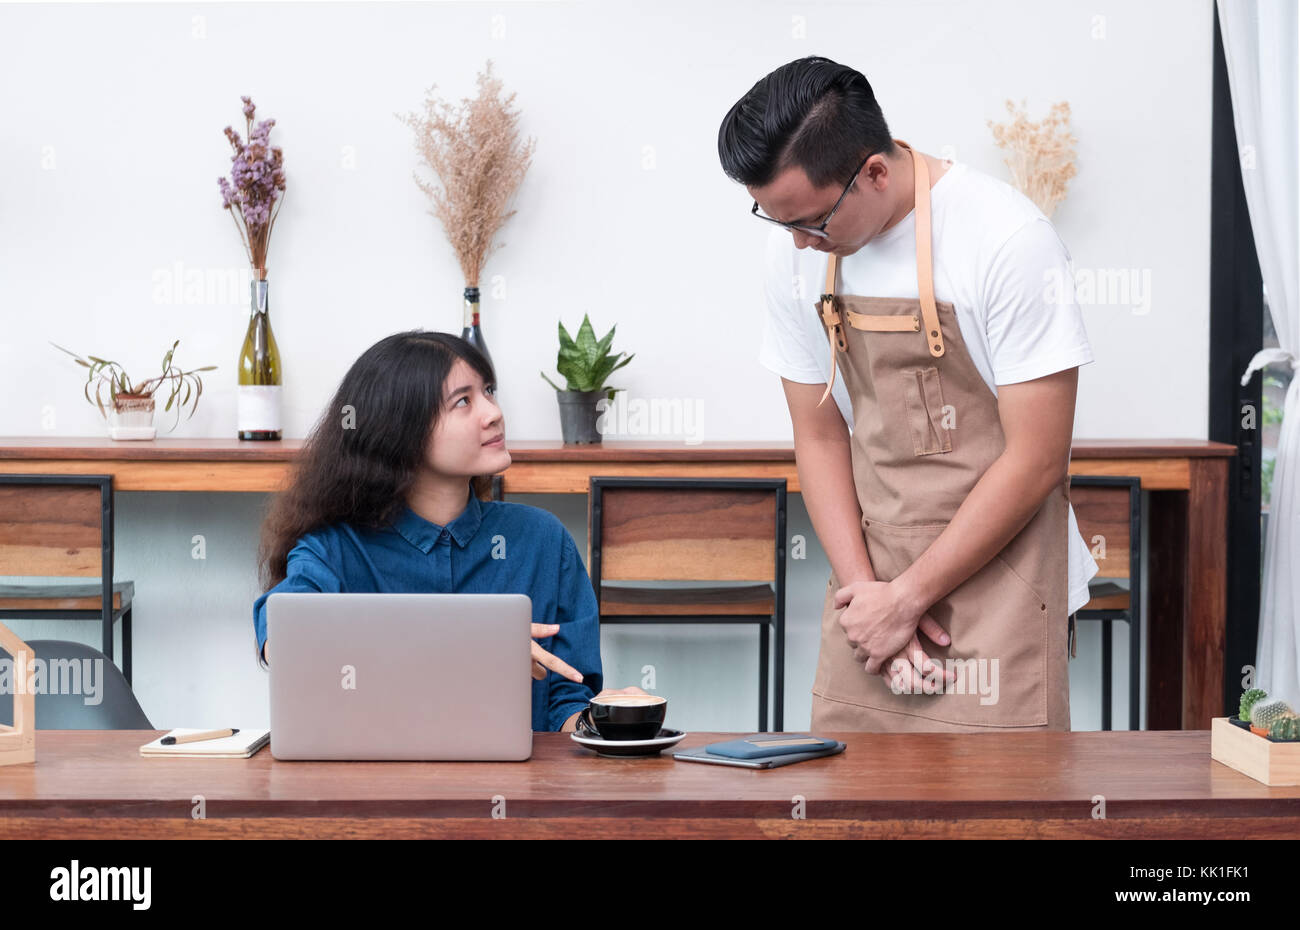 asia woman customer complaining to waiter about food in cafe restaurant,unhappy emotion service in coffee shop Stock Photo